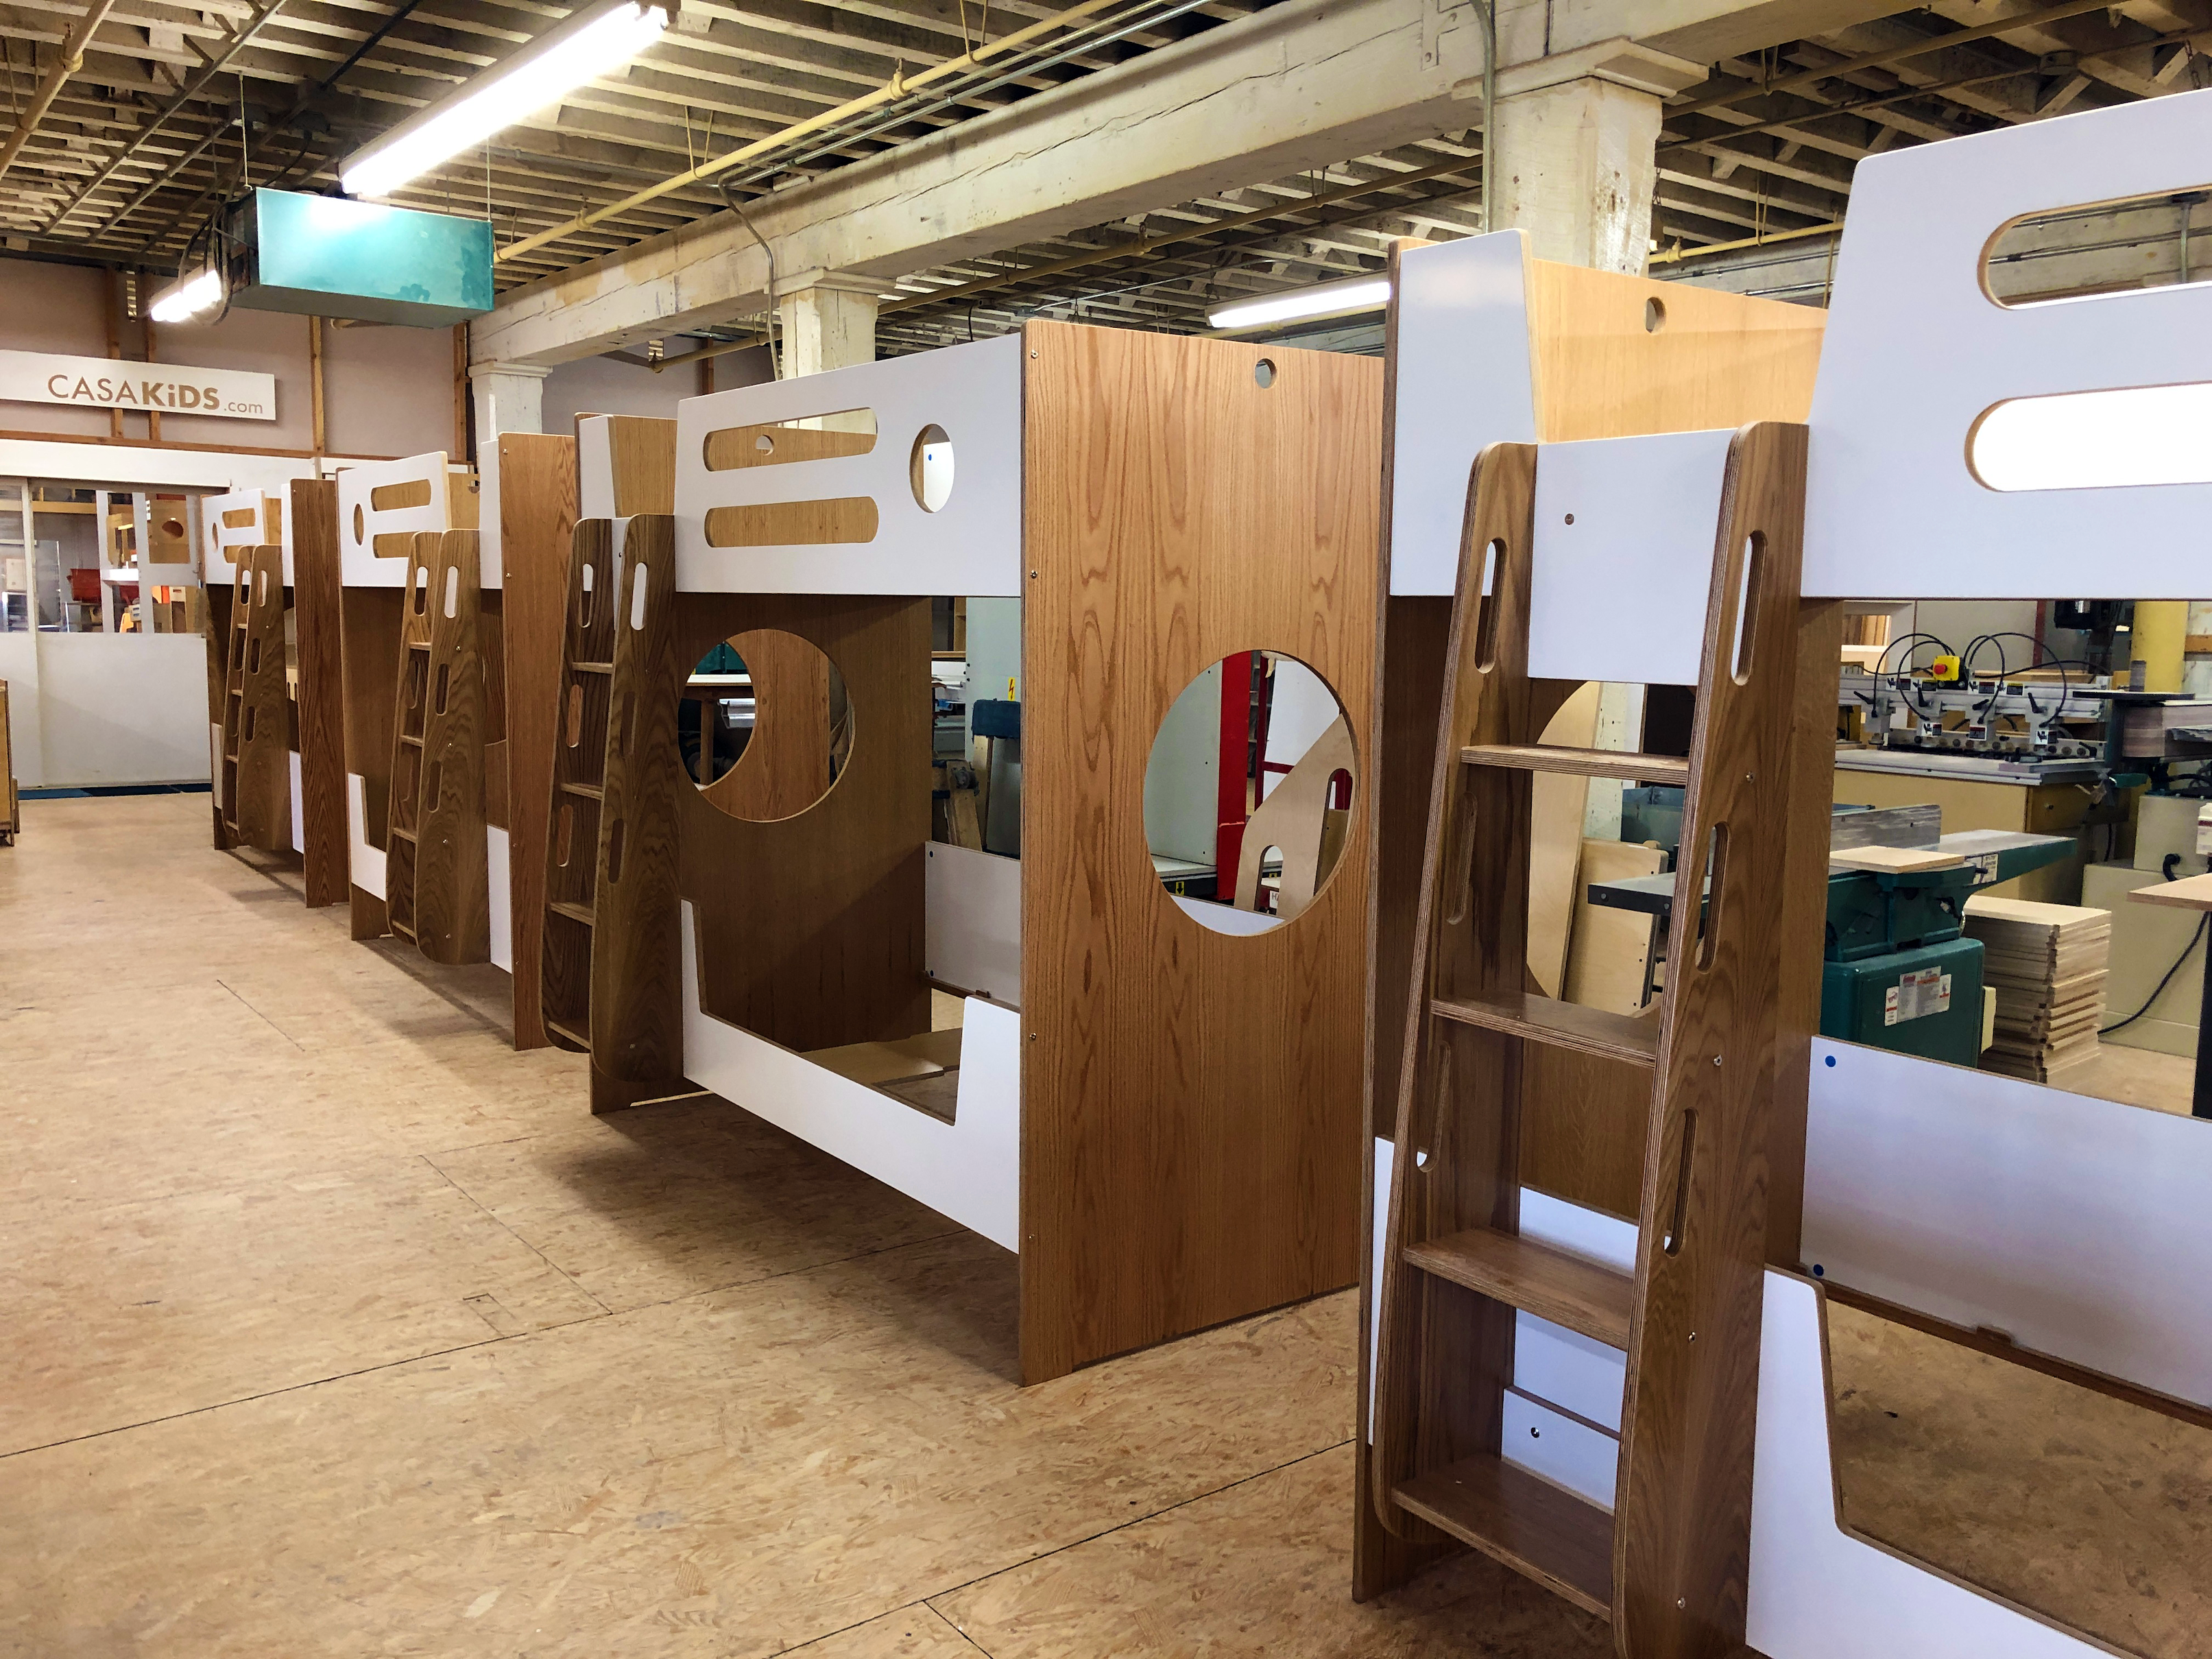 A workshop with a series of unfinished wooden children's bed frames featuring playful cutouts and built-in ladders.